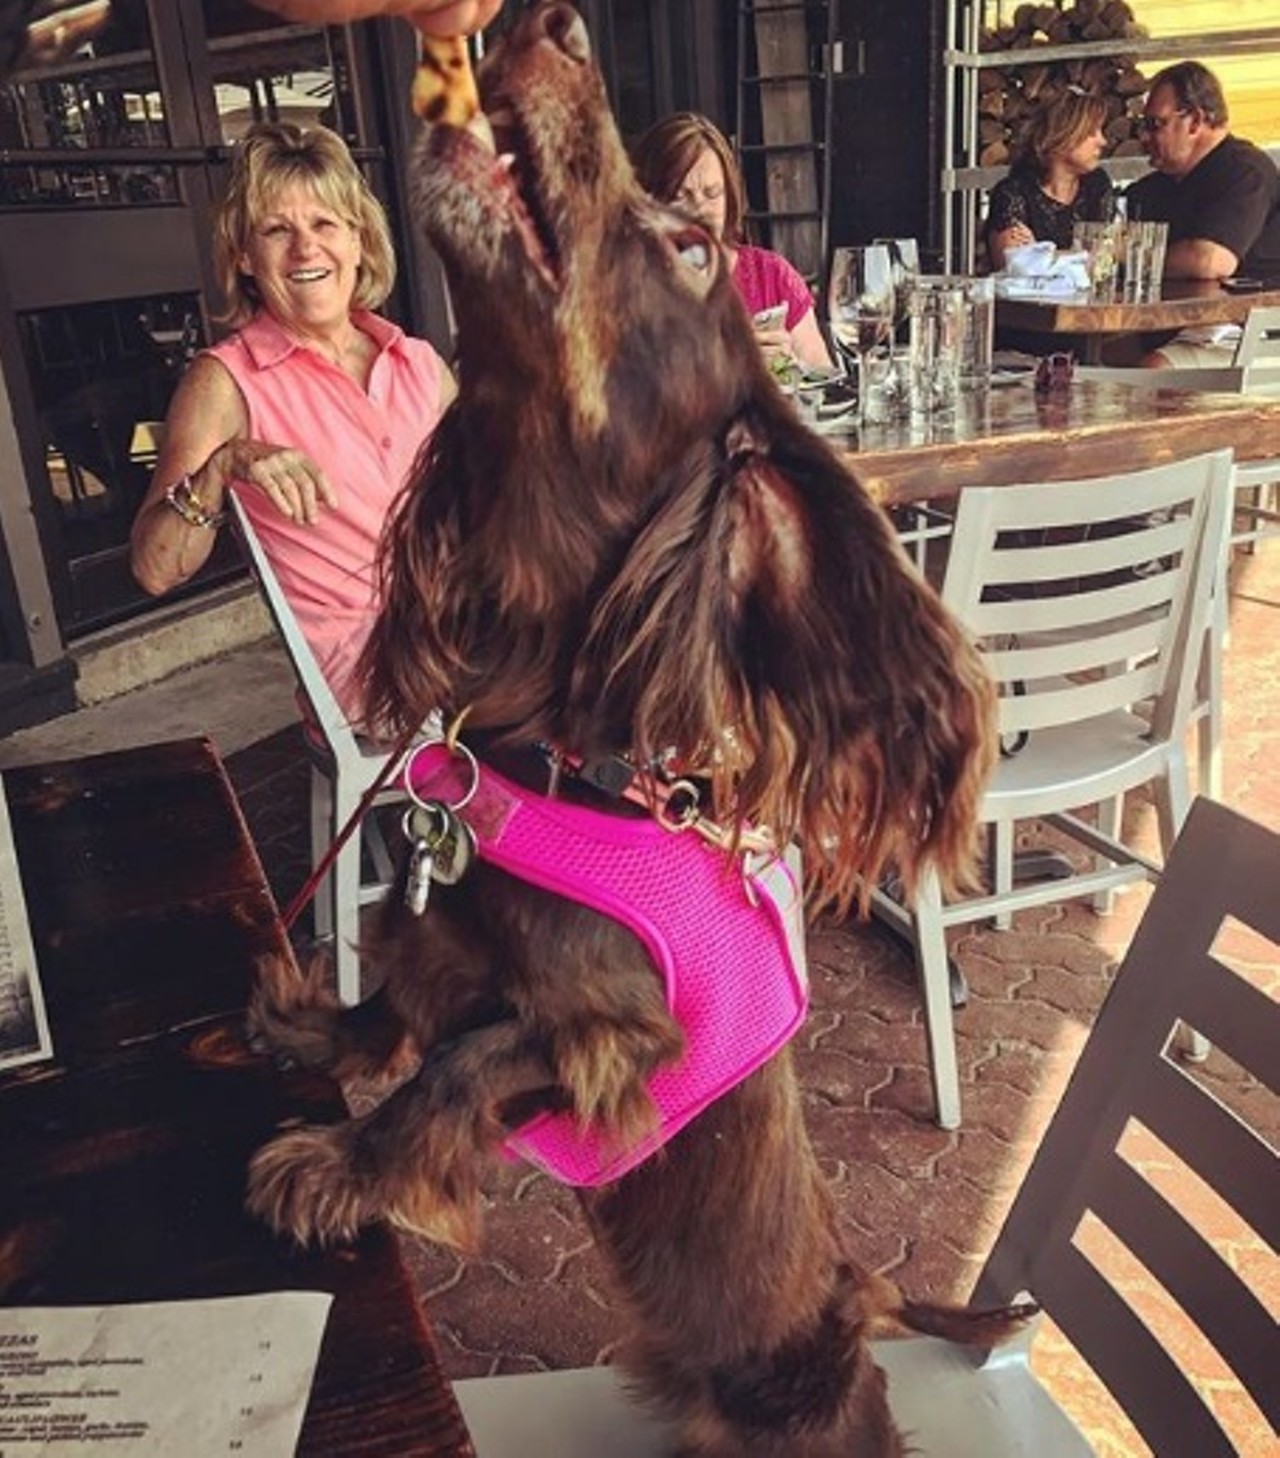 Collision Bend Brewing Co.
1250 Old River Rd., Cleveland
Stop in for a Lake Erie Sunset beer and some fresh water for your four-legged friend. Take a break from a walk and relax on this beautiful patio overlooking the river.    
Photo via cocoandfrends/Instagram